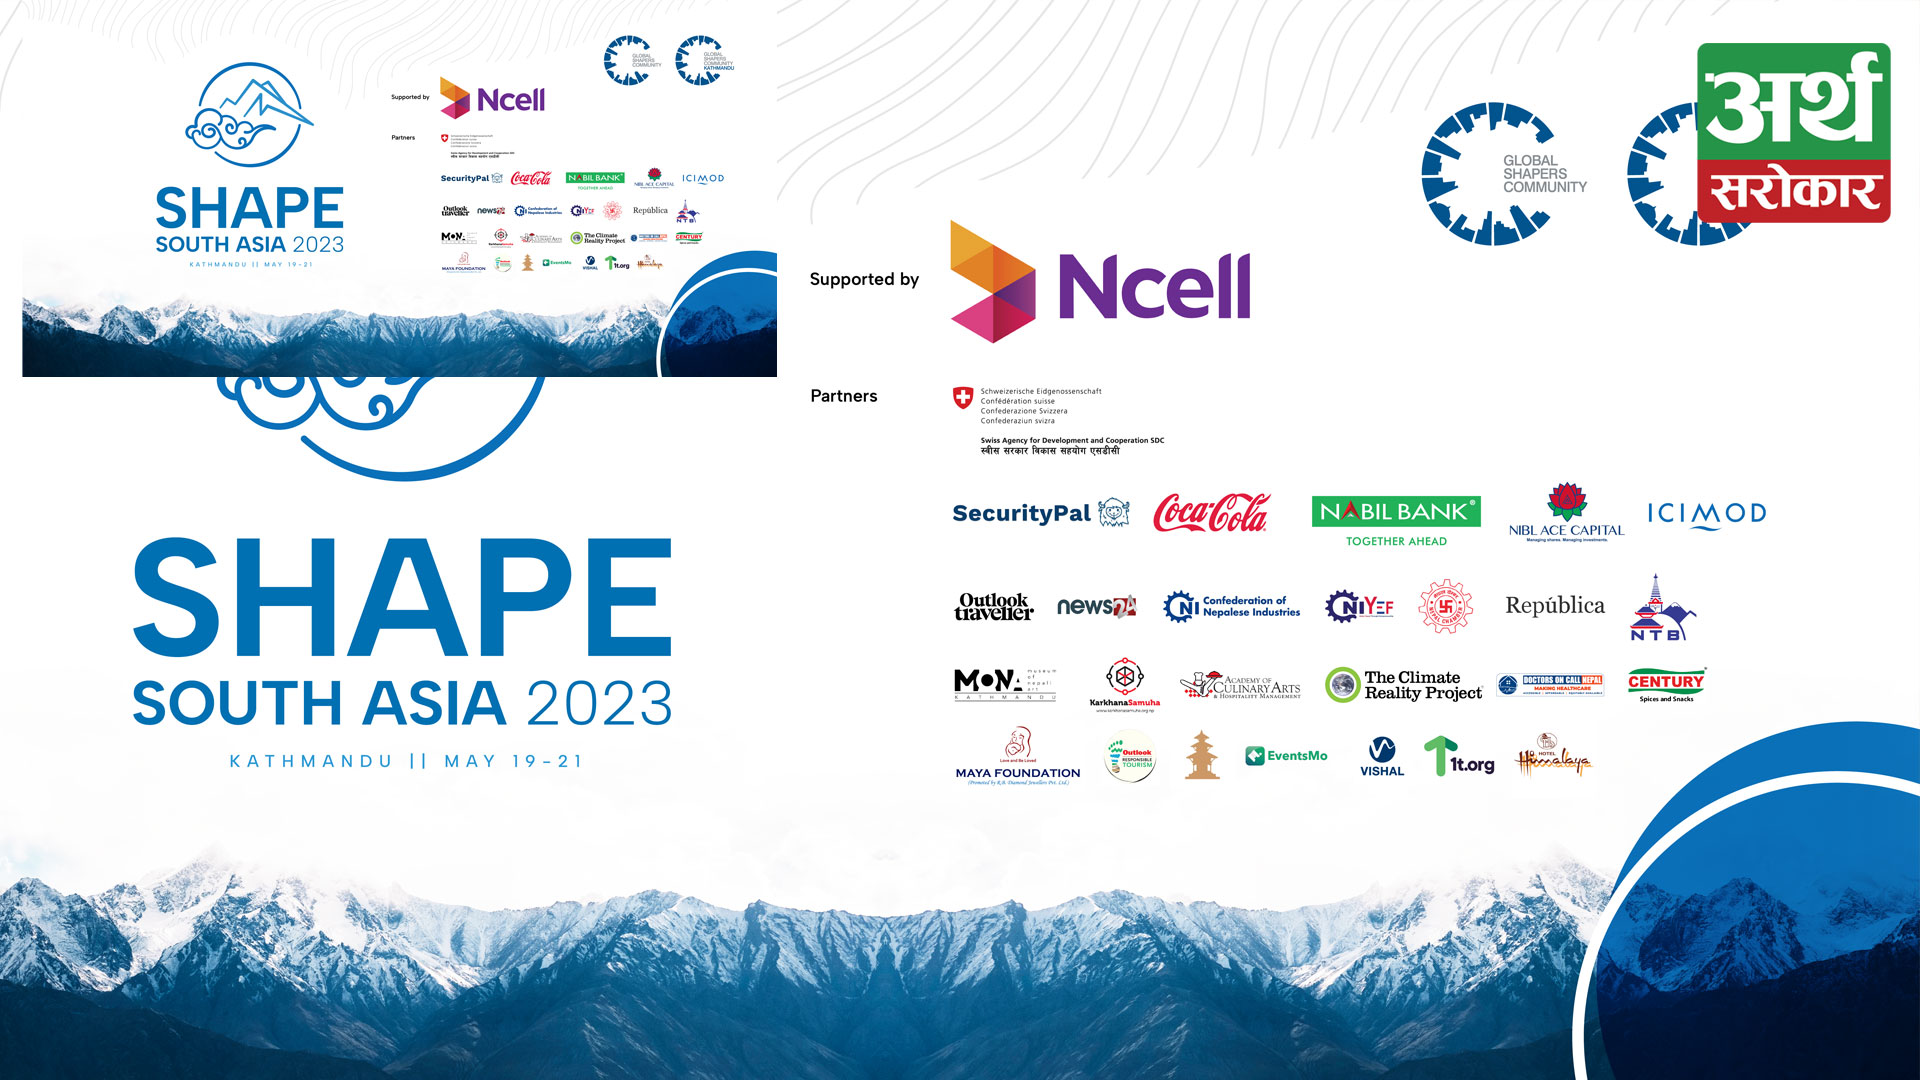 Global Shapers Community collaborates with Ncell to discuss Climate Resiliency at SHAPE South Asia 2023